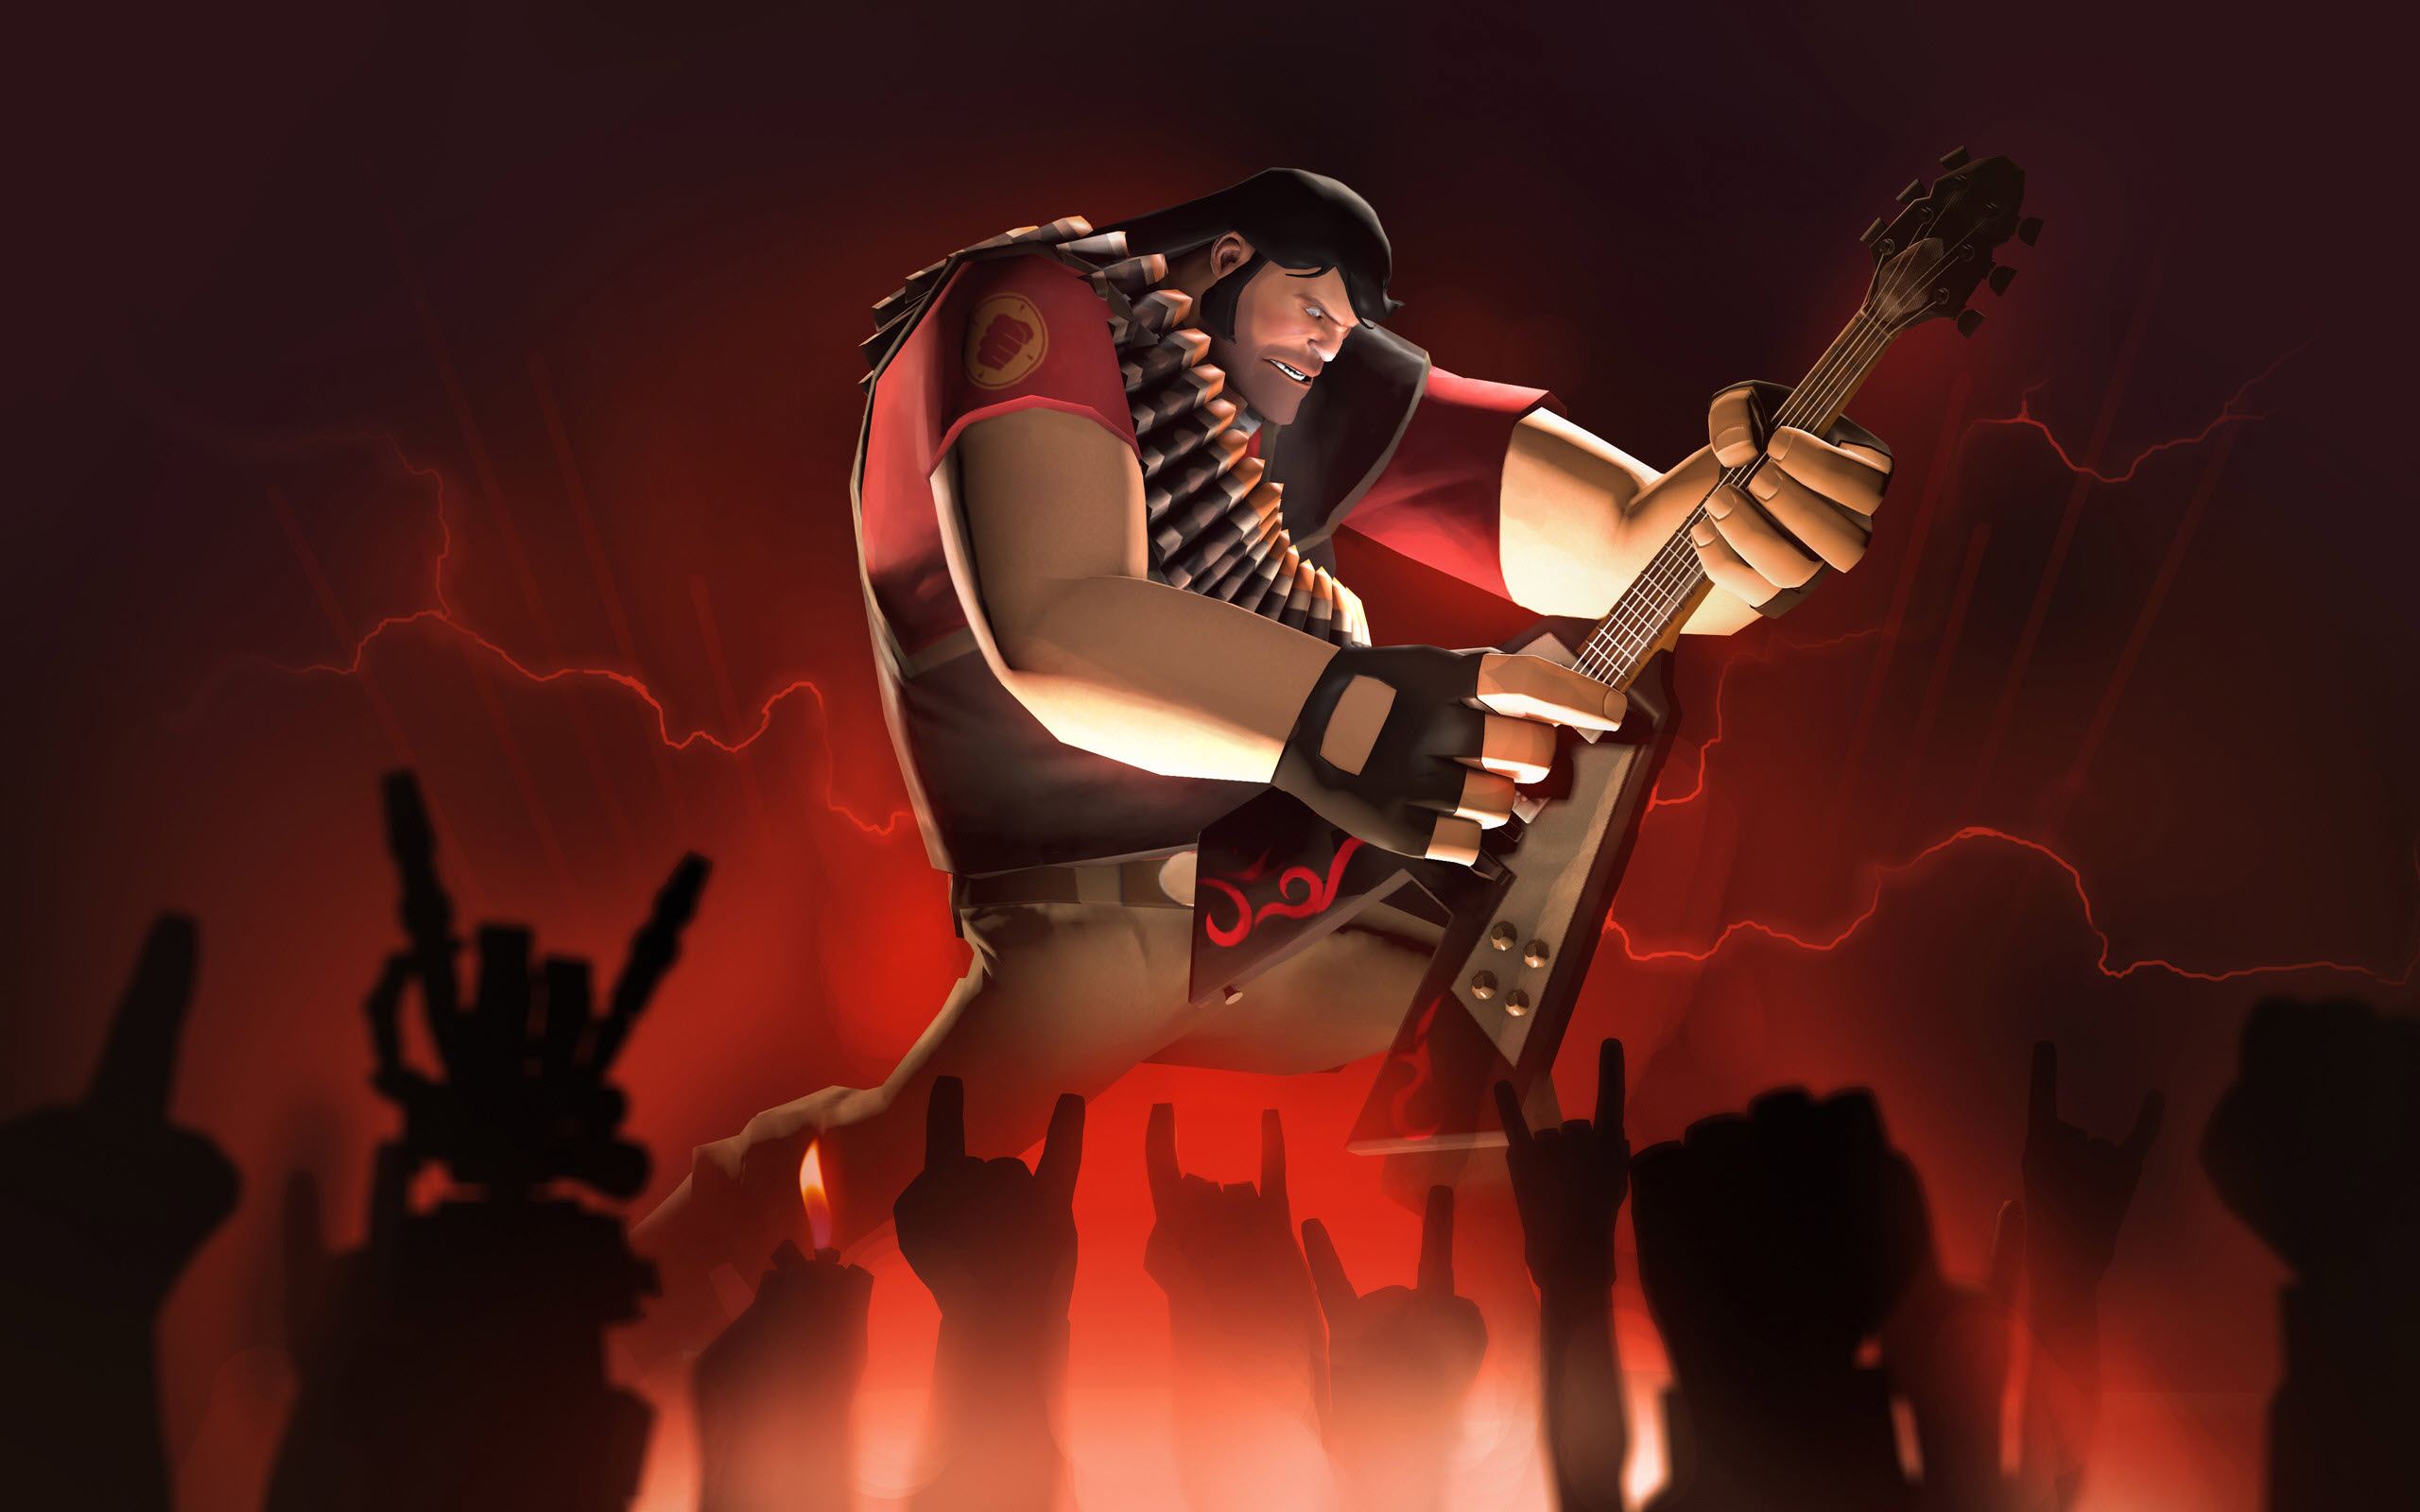 team fortress 2 on steam crashing for mac users